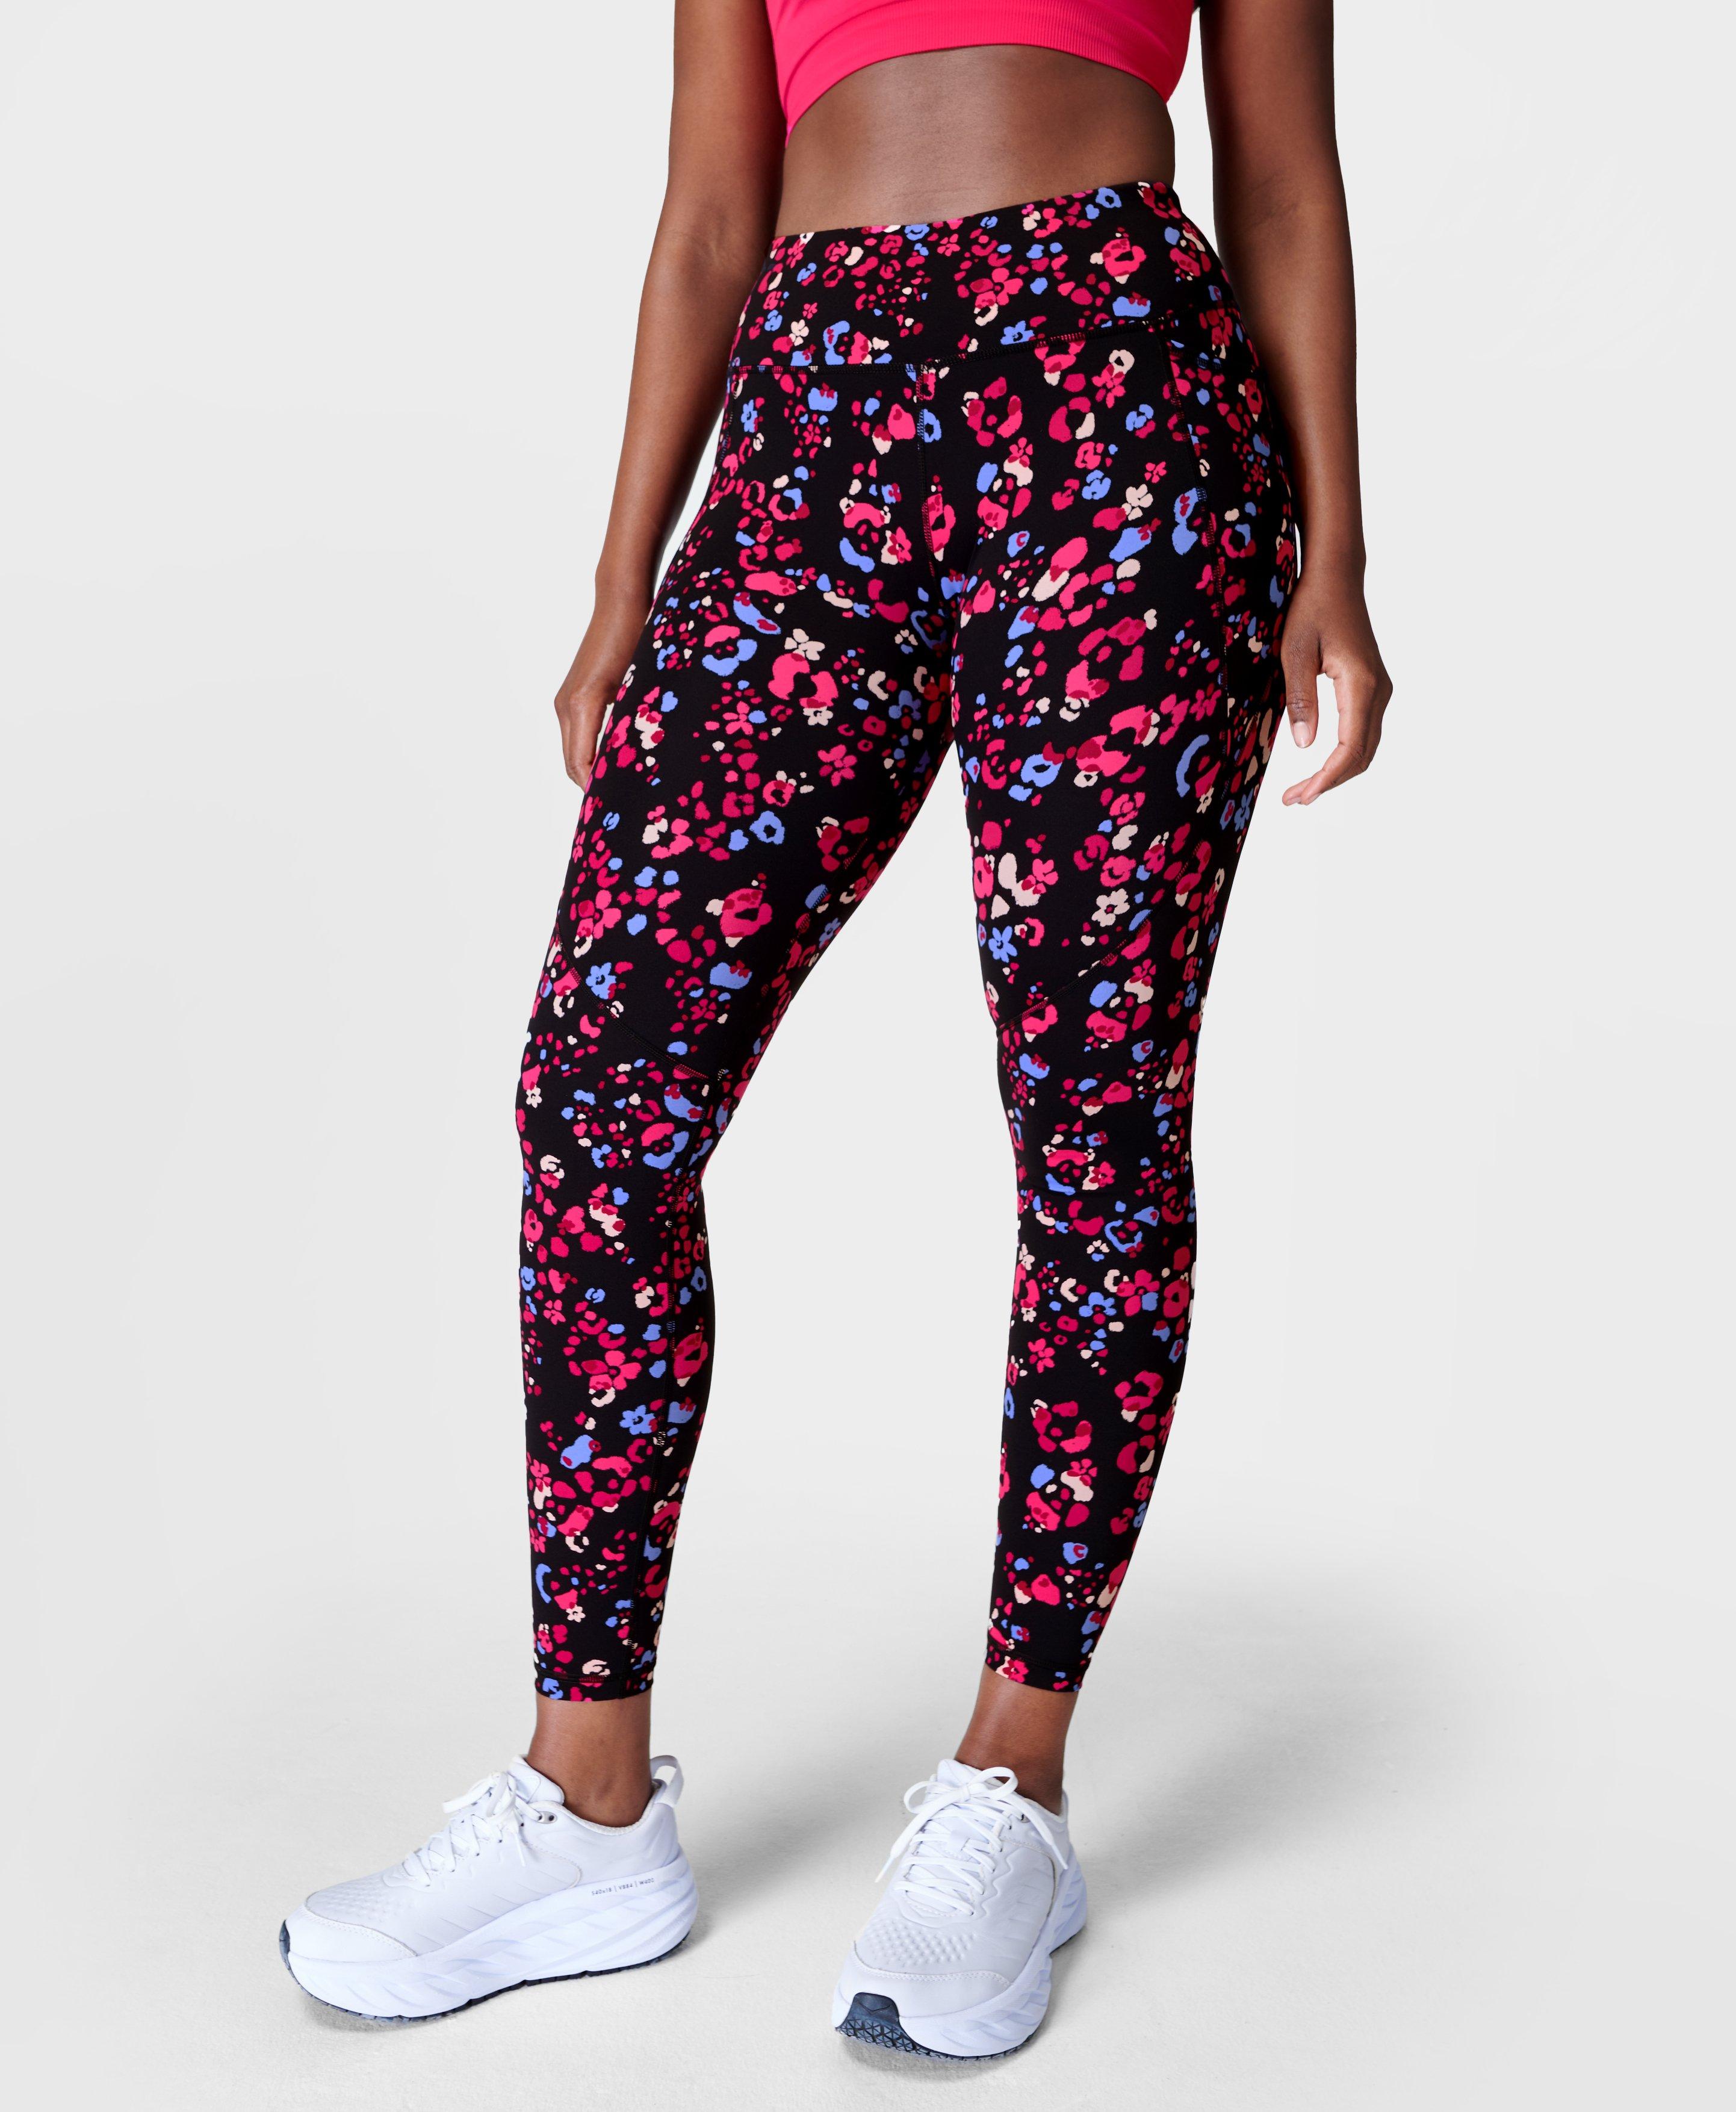 Floral and Flower Print Leggings and Workout Gear